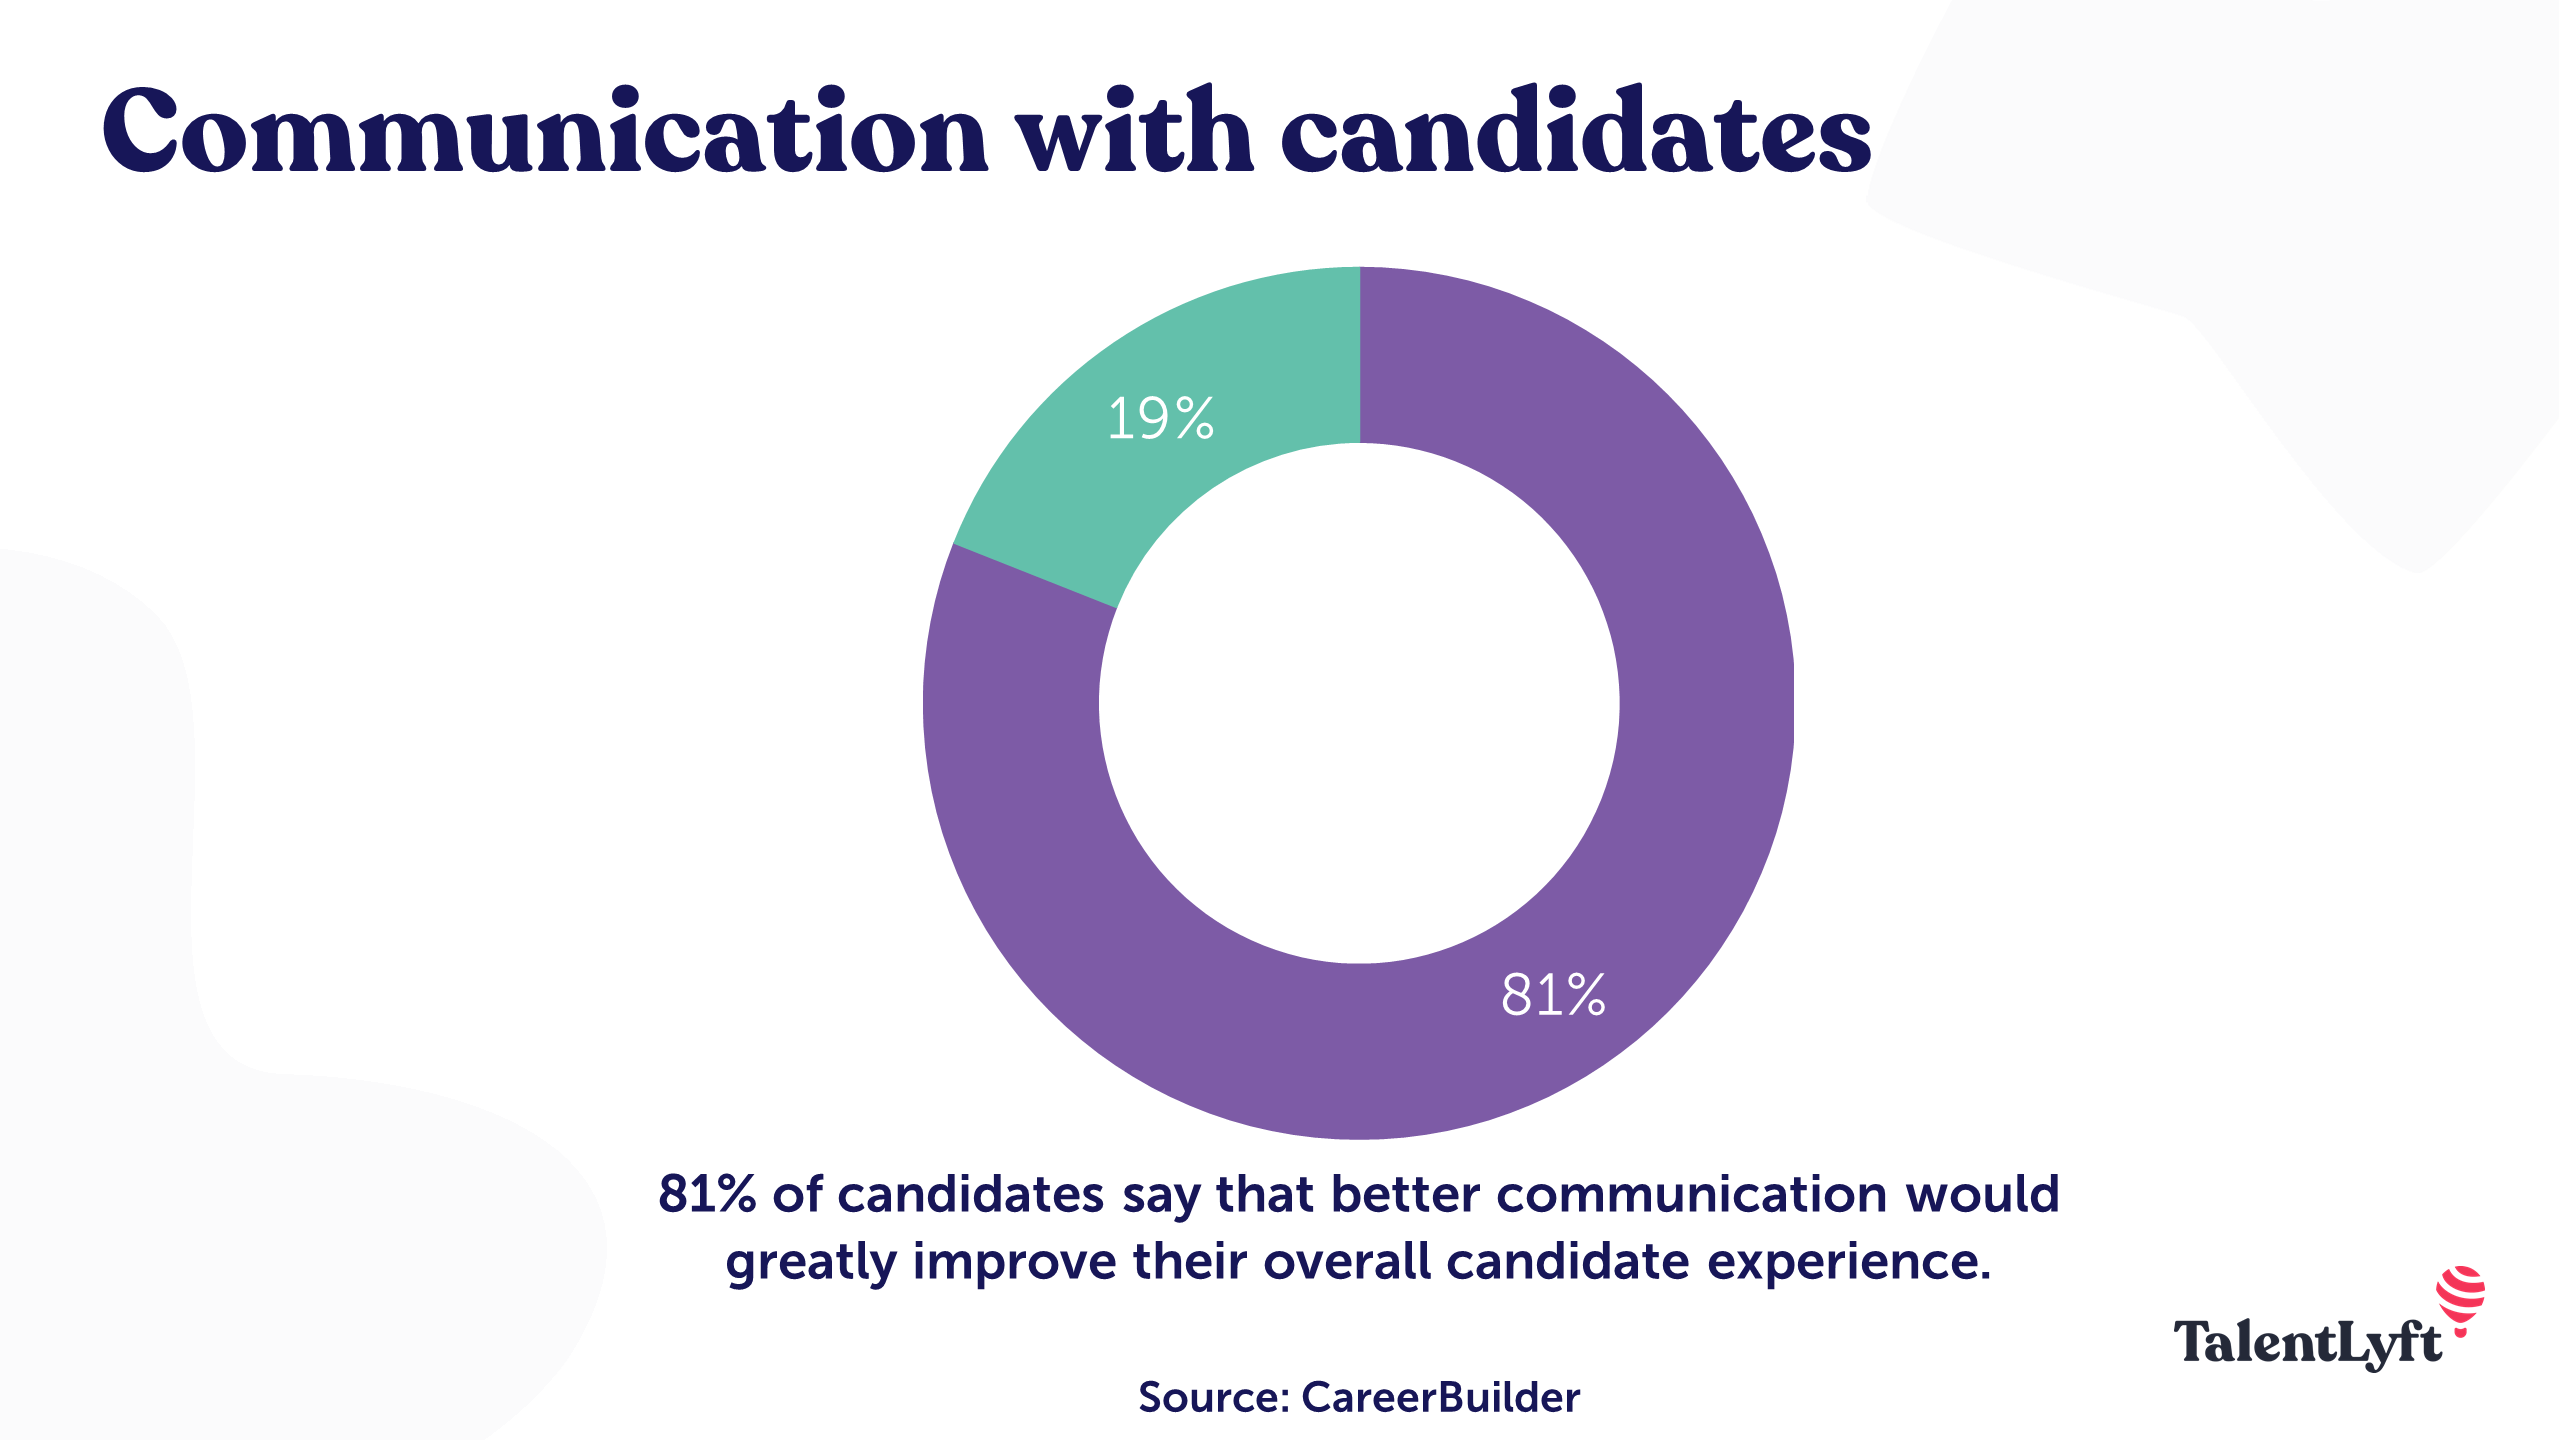 Communication with candidates